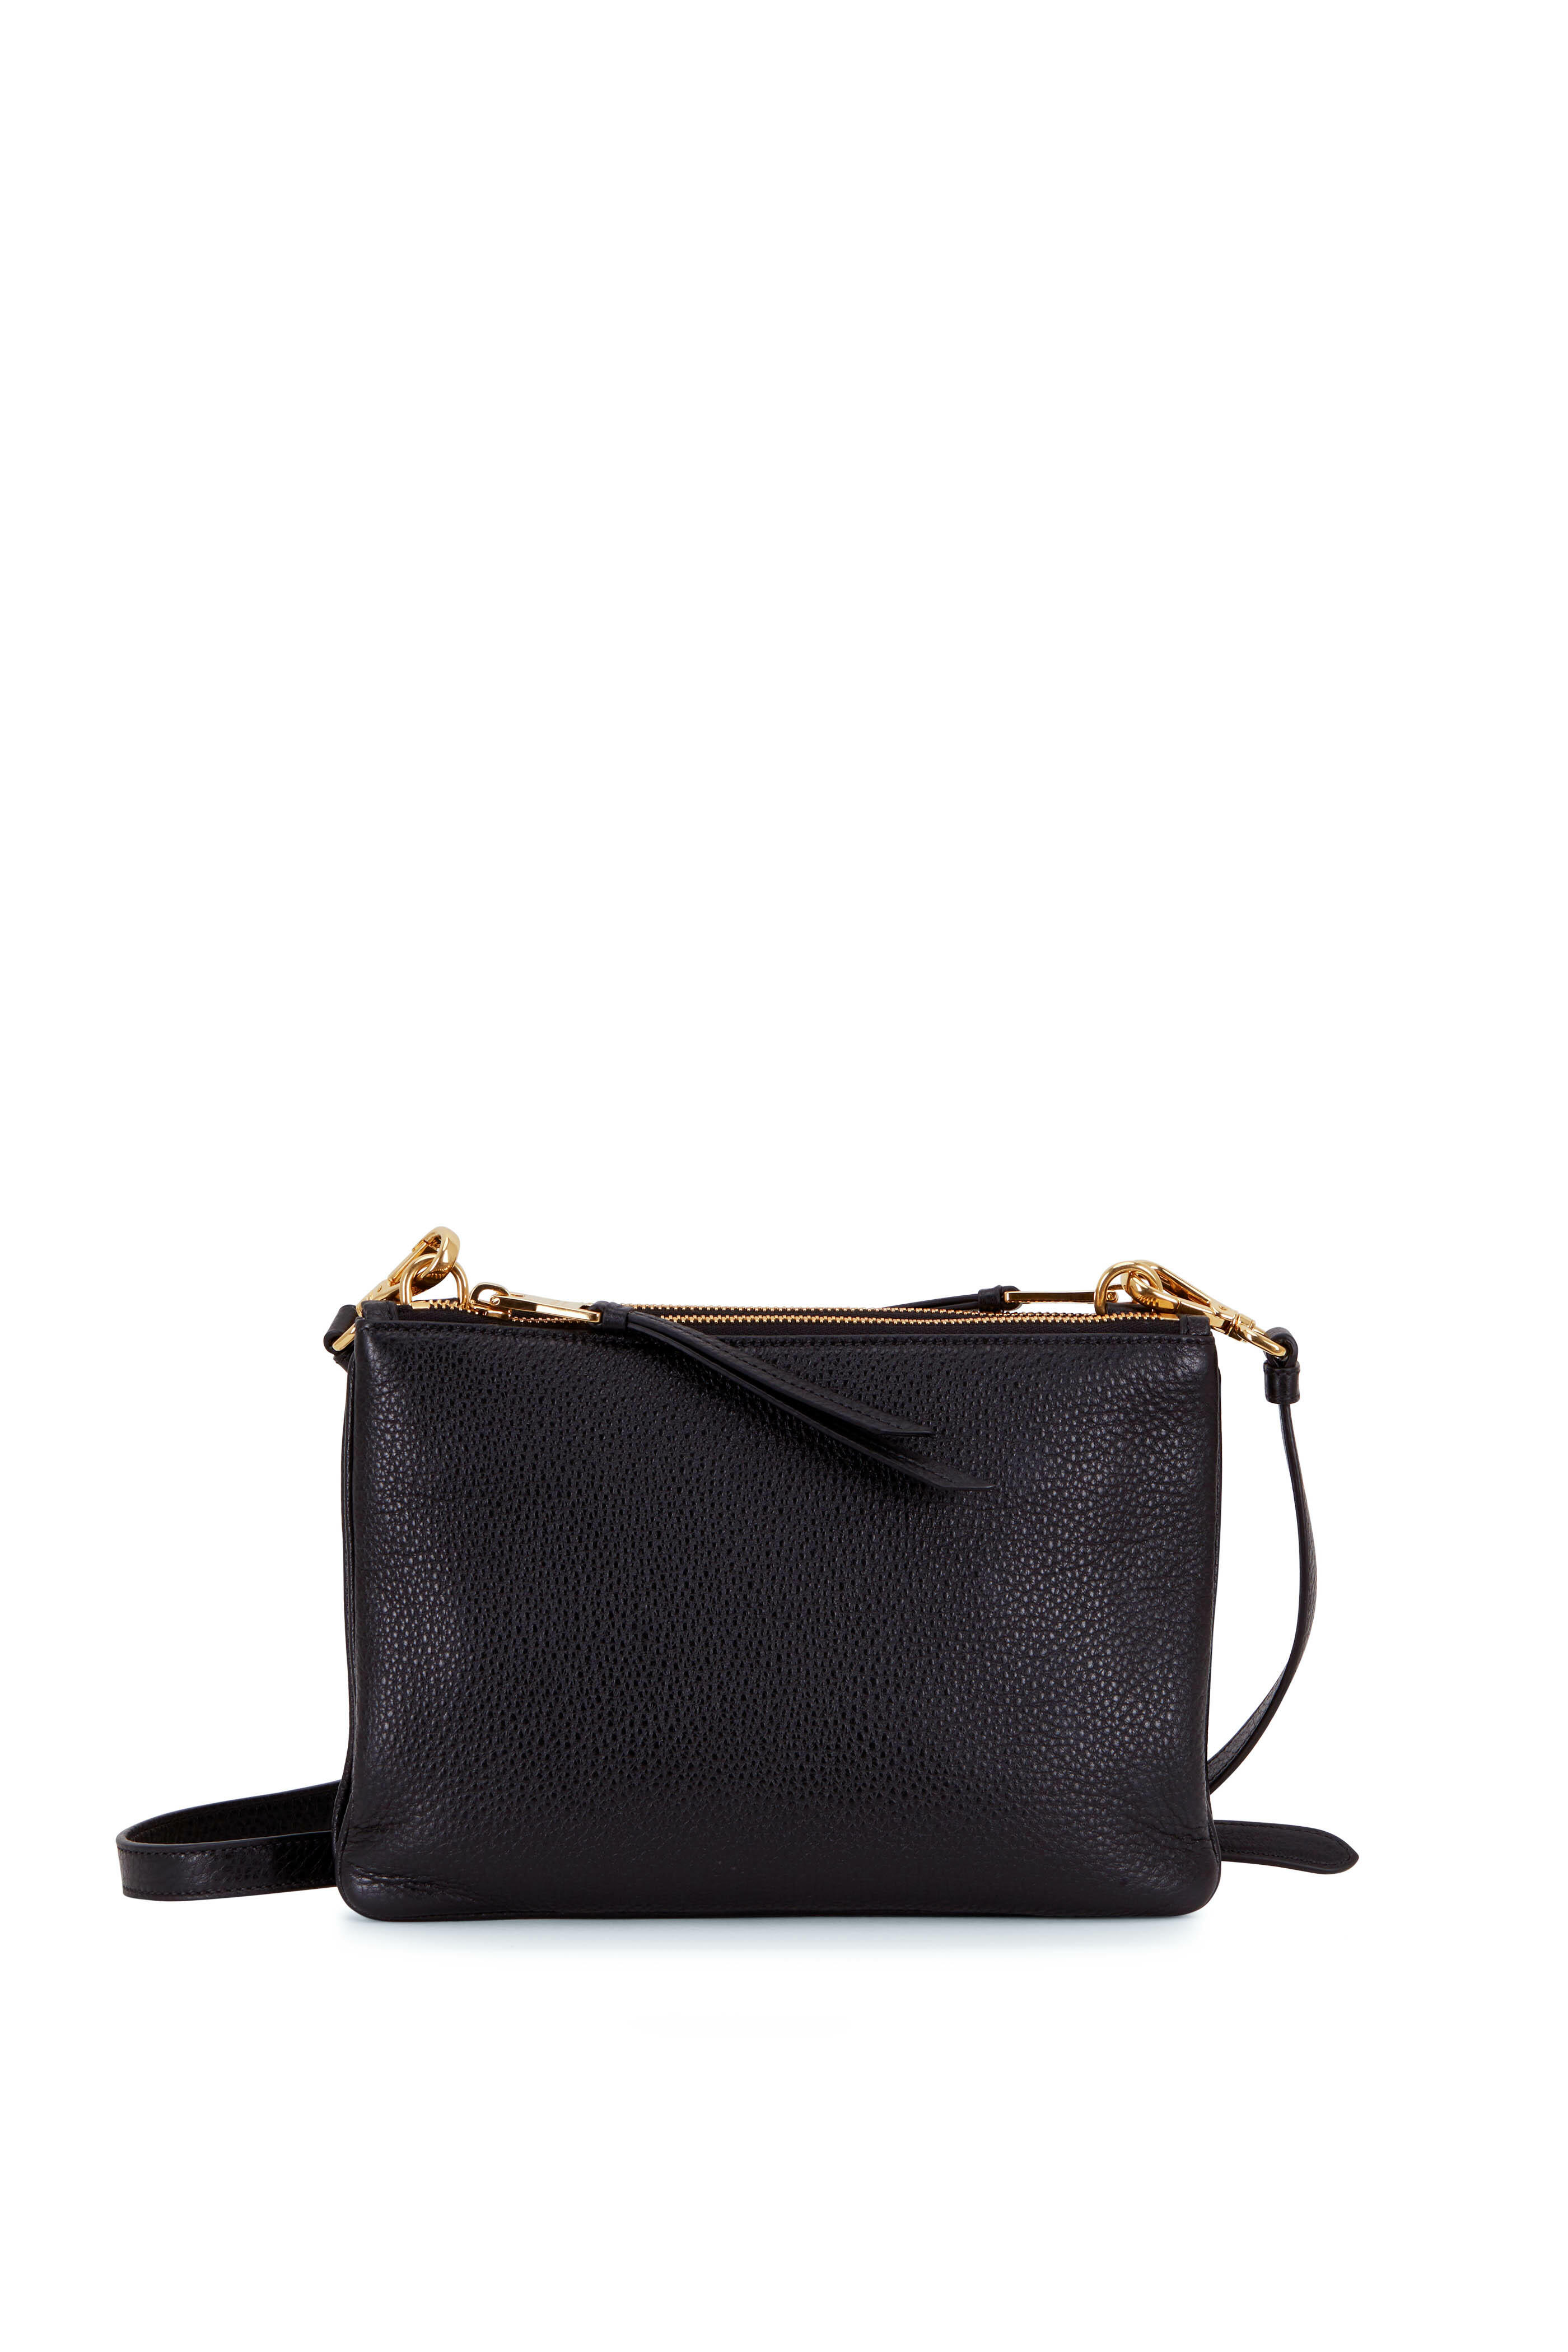 The One Doubled Black, Crossbody Bag